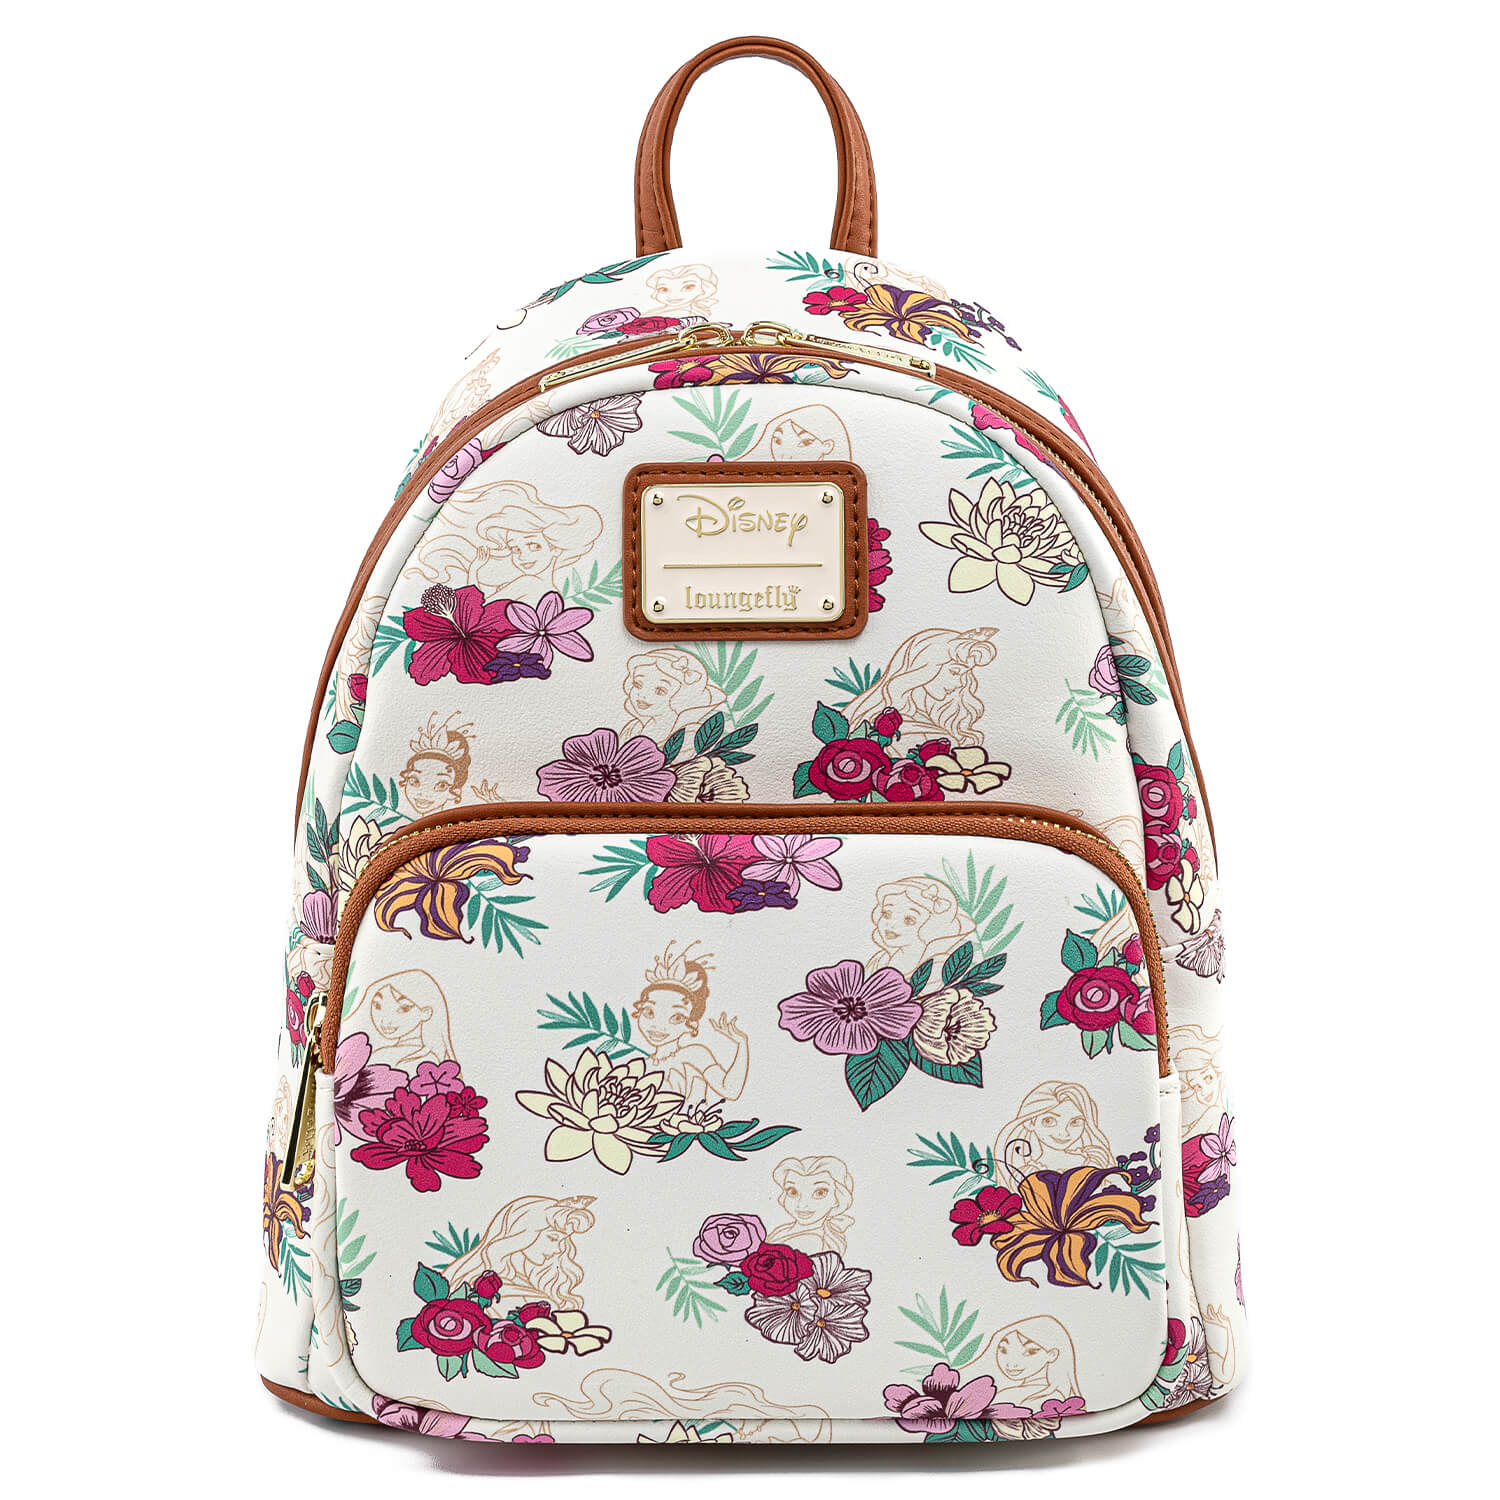 Loungefly Disney Princess Floral Backpack